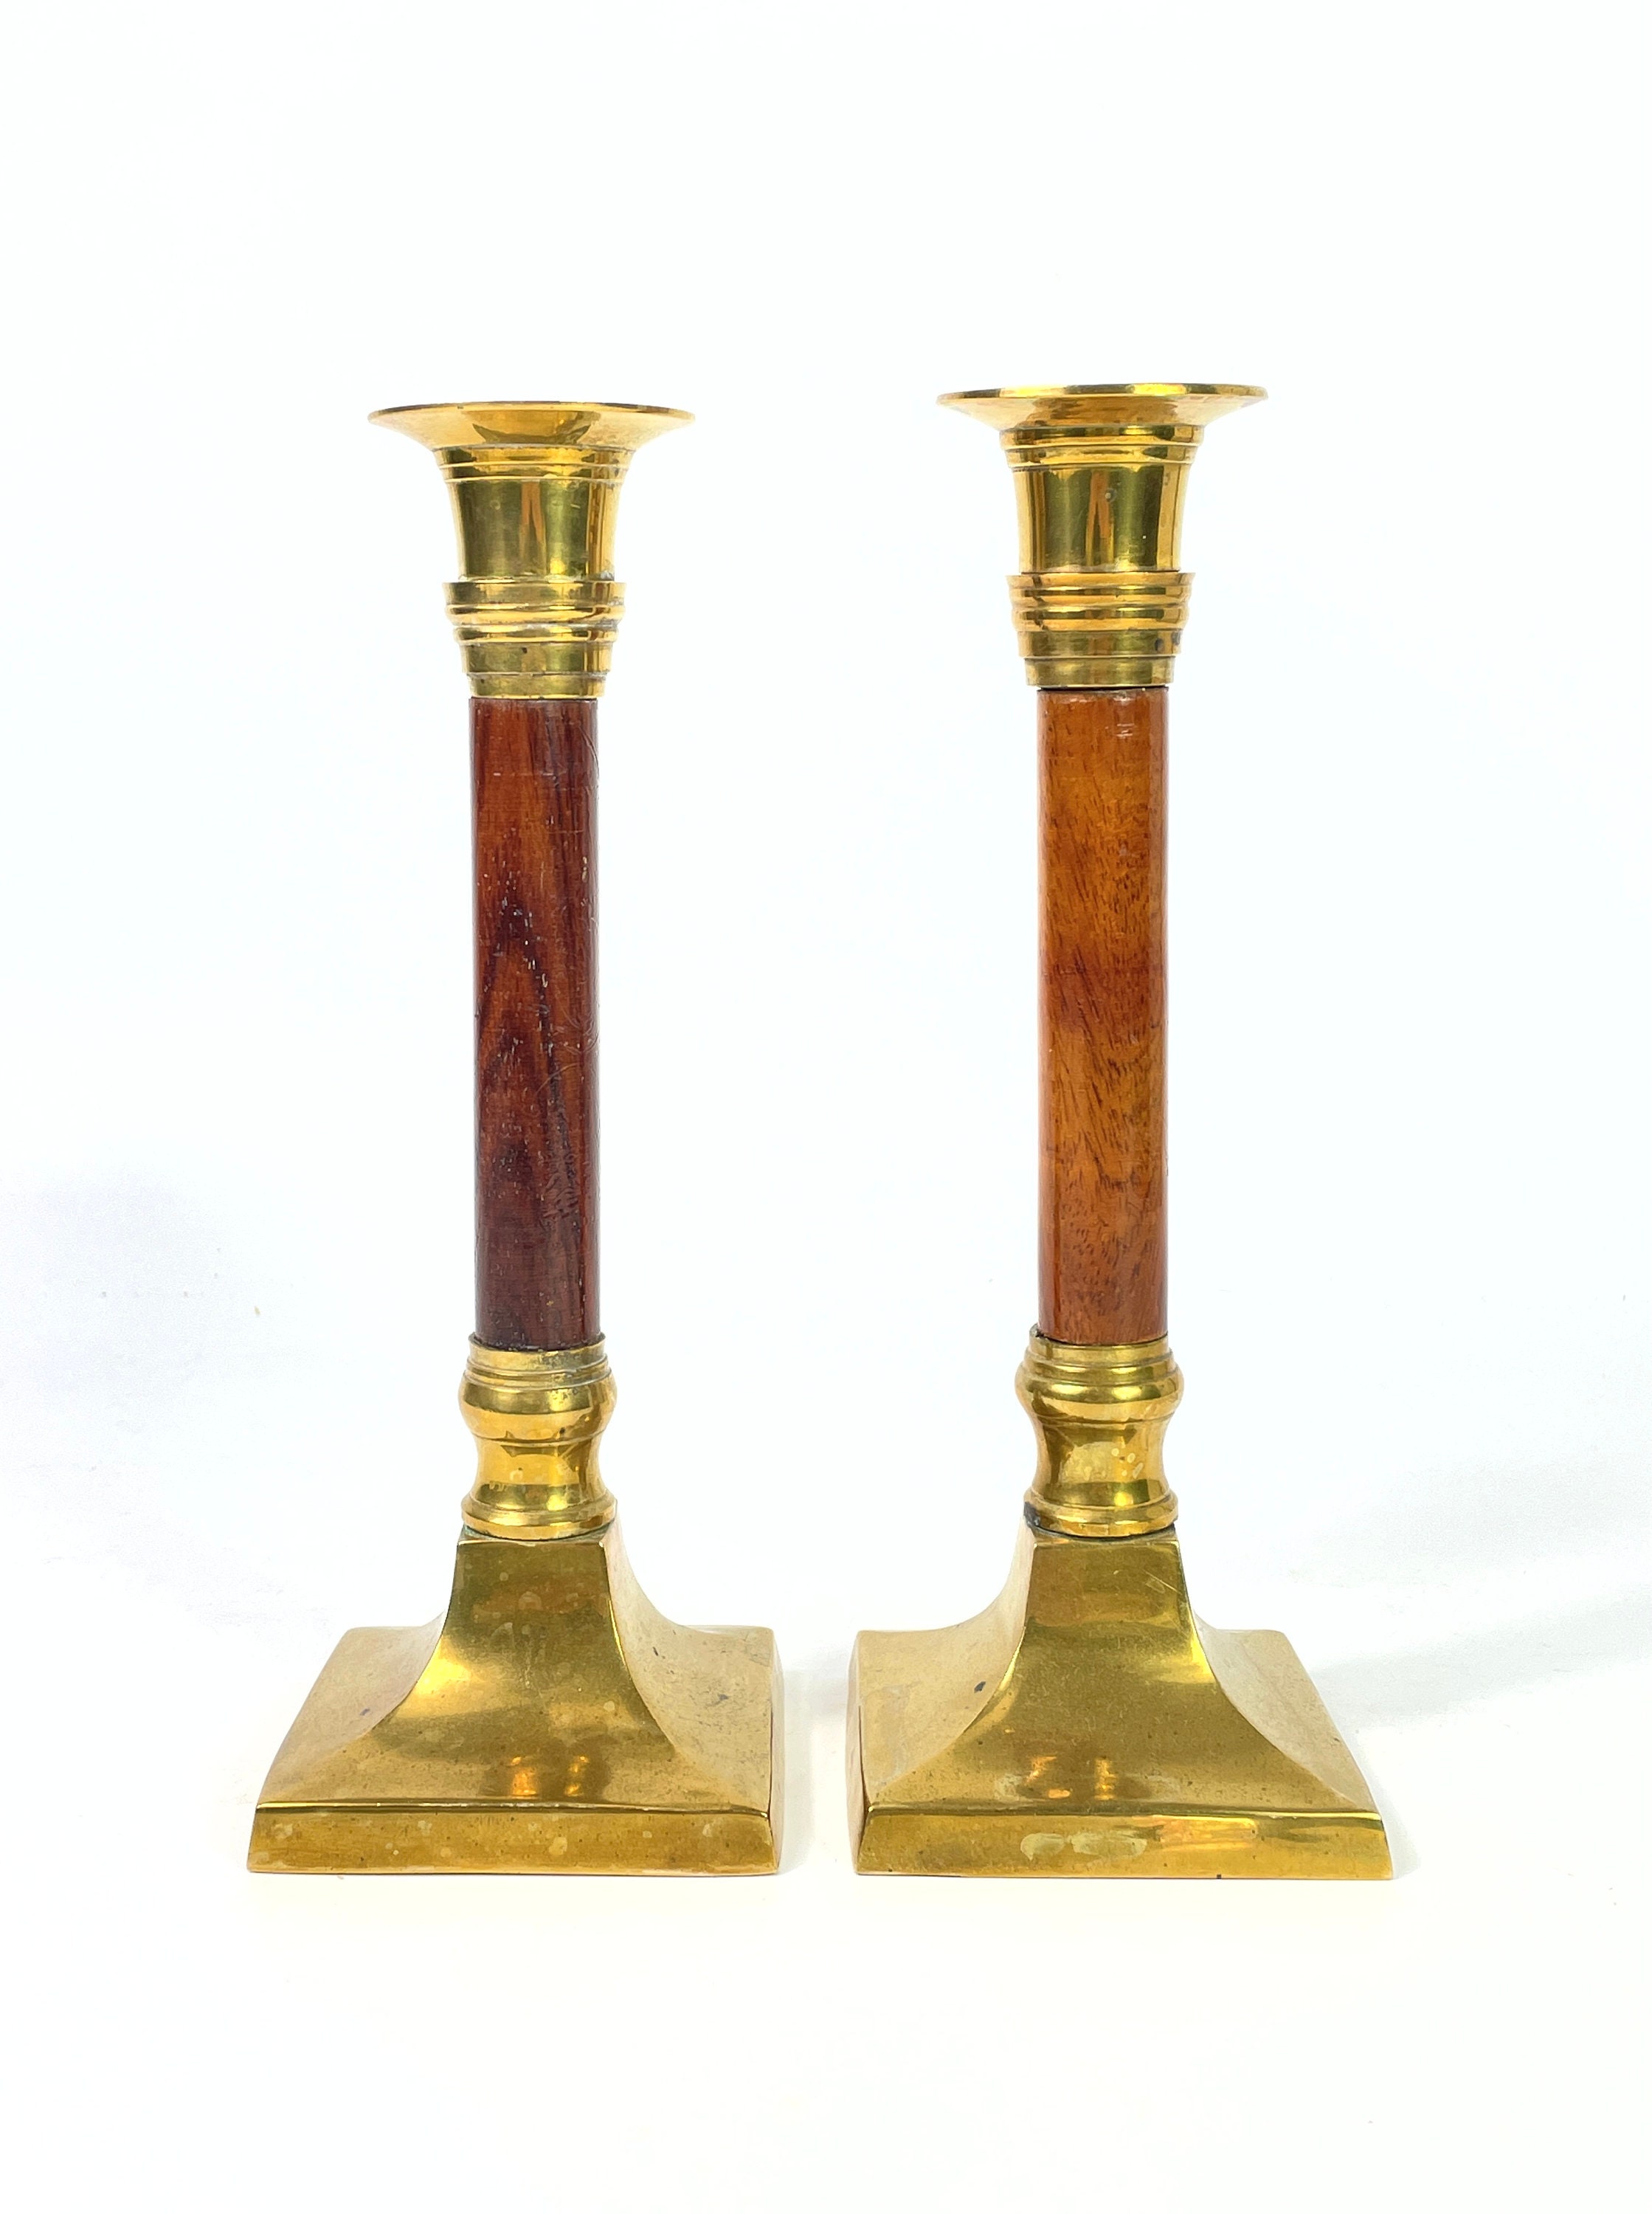 Pair of French Restauration Brass Candlesticks with Swirled